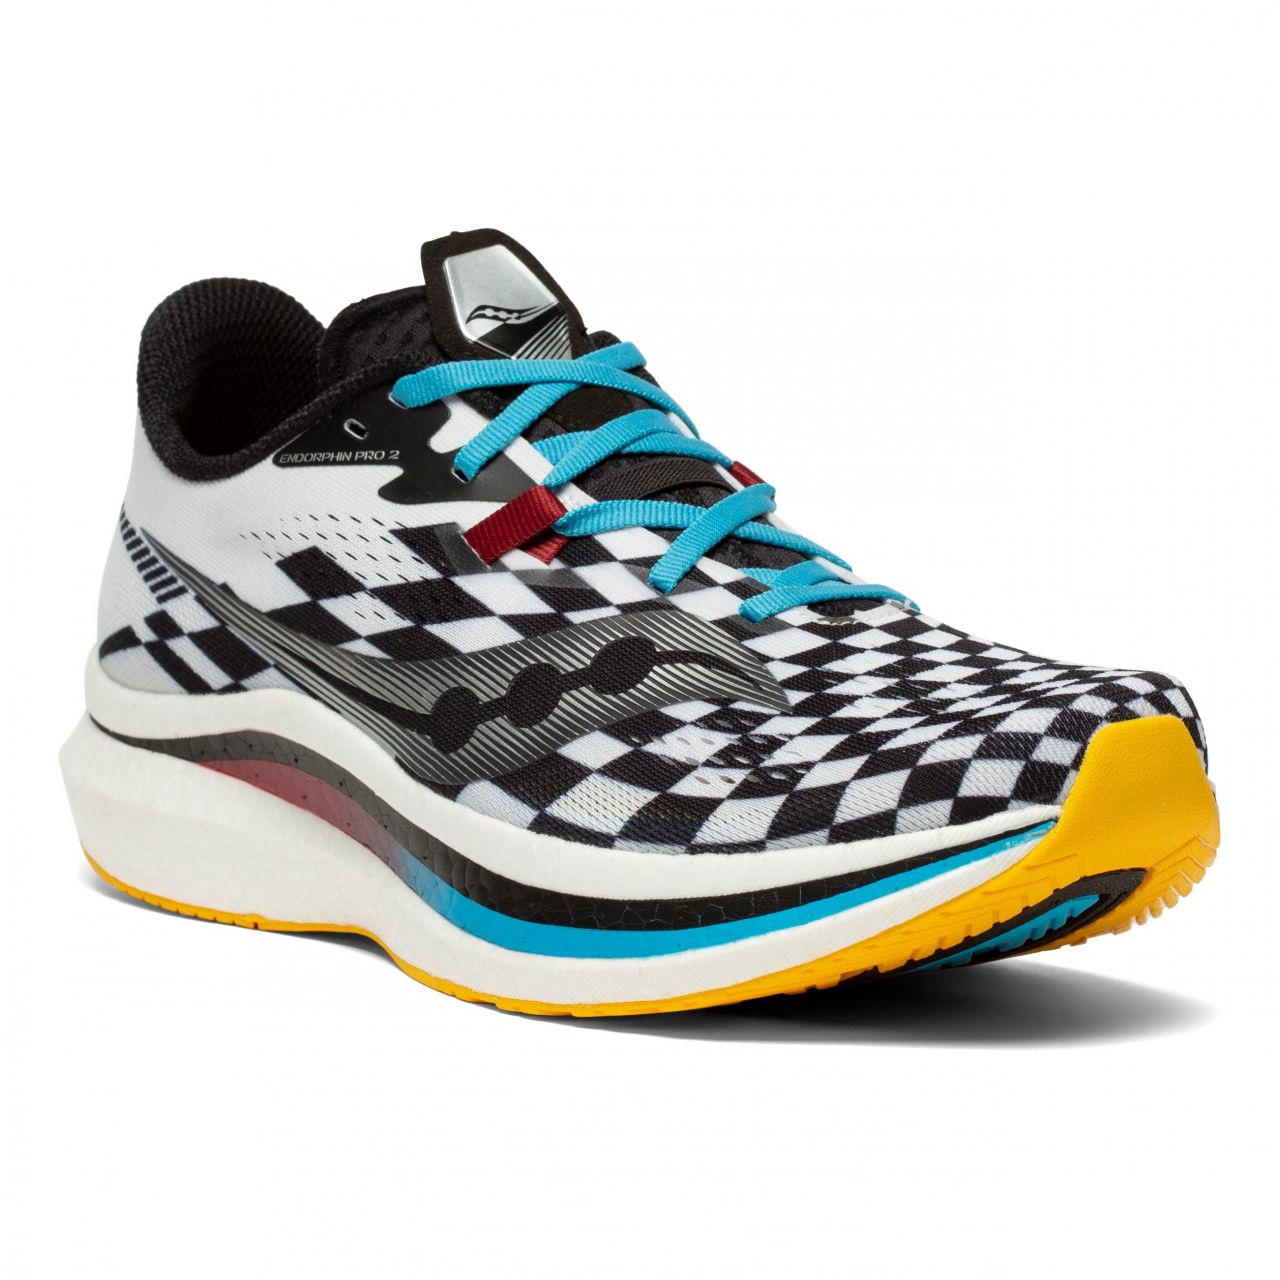 SAUCONY ENDORPHIN PRO 2 REVERIE Chaussures running saucony